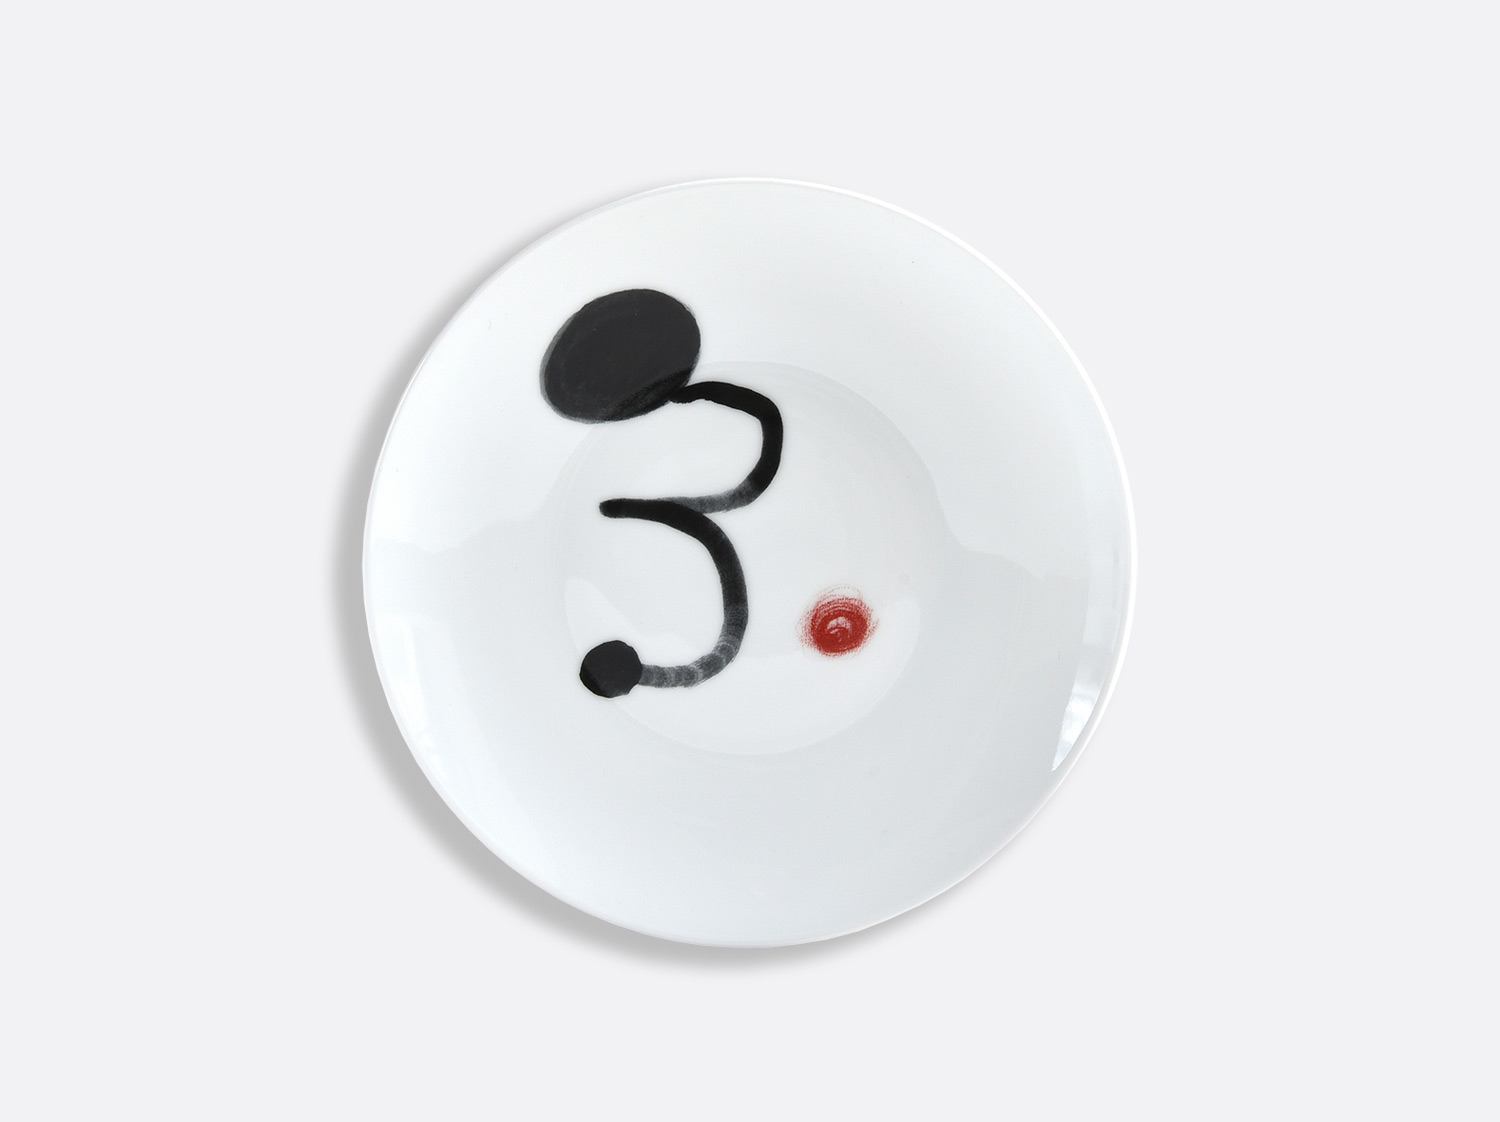 China 2 Bread and butter plates 6.5" Rouge - Page 52 of the collection PARLER SEUL - Joan Miro | Bernardaud